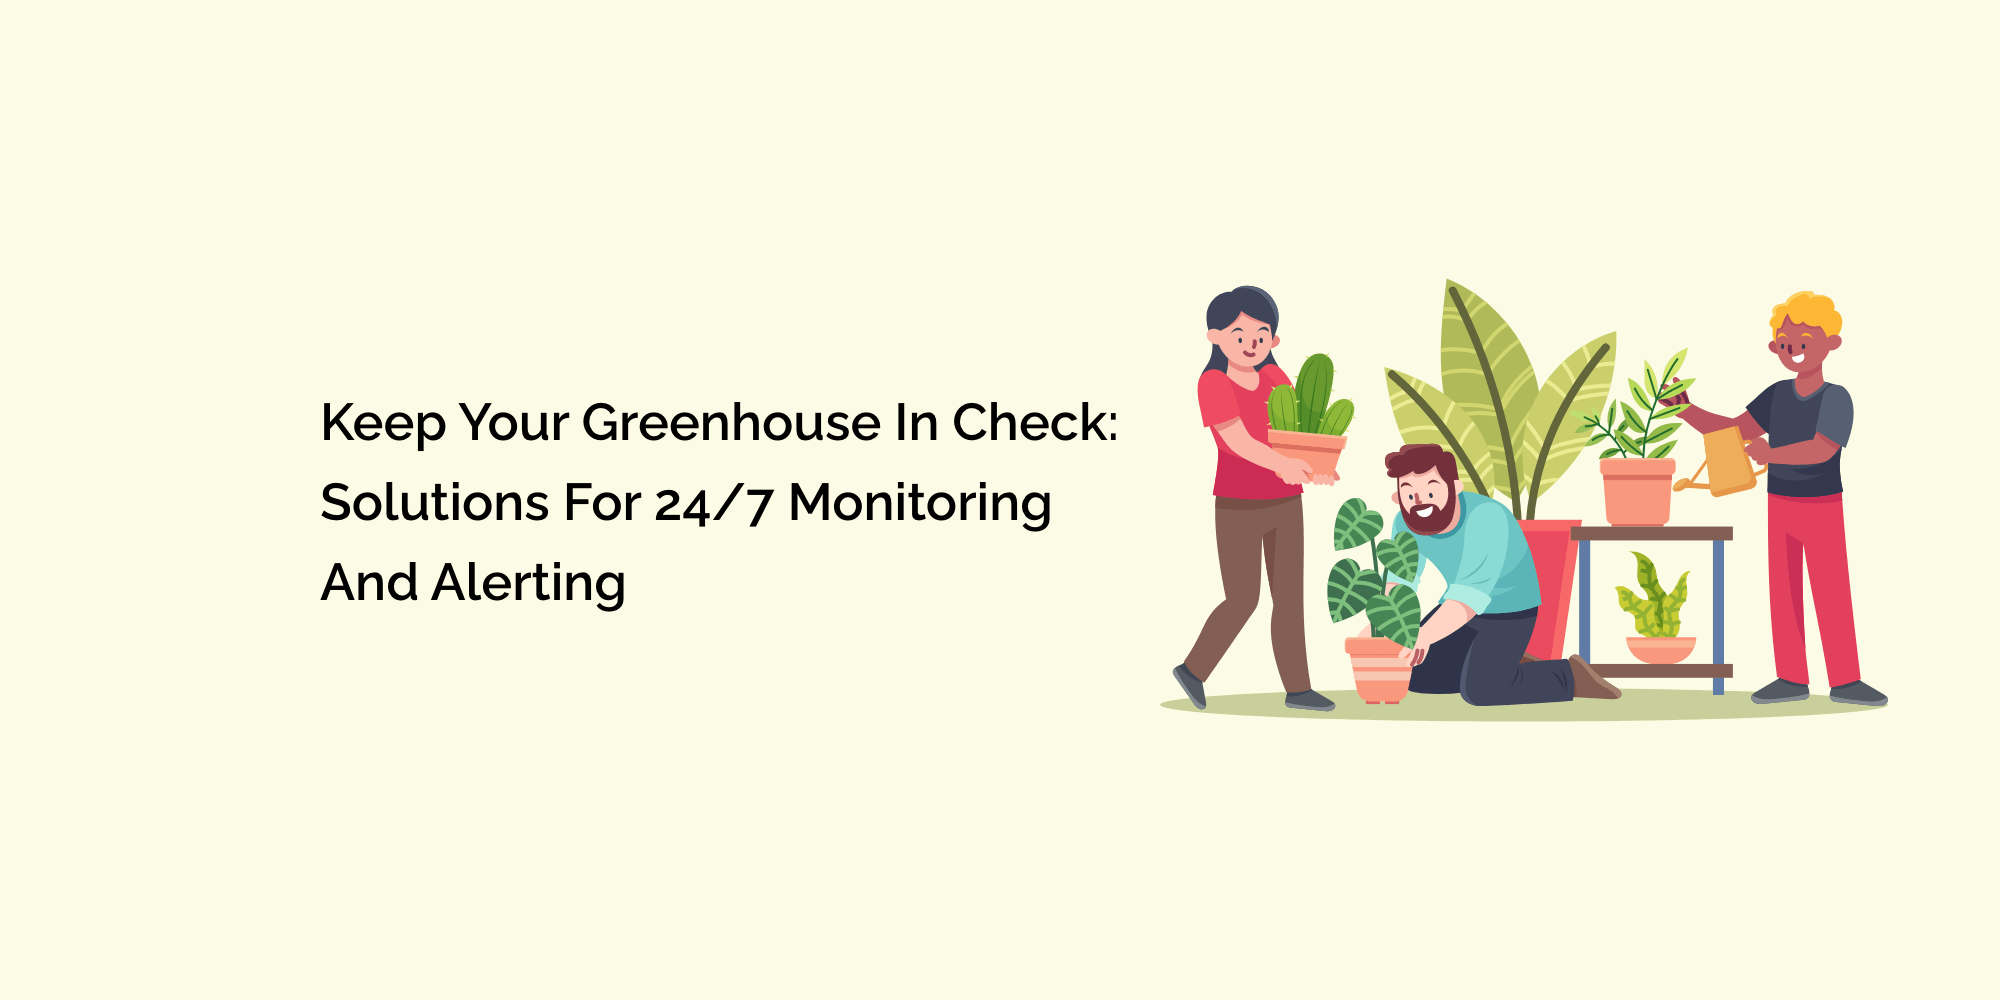 Keep Your Greenhouse in Check: Solutions for 24/7 Monitoring and Alerting